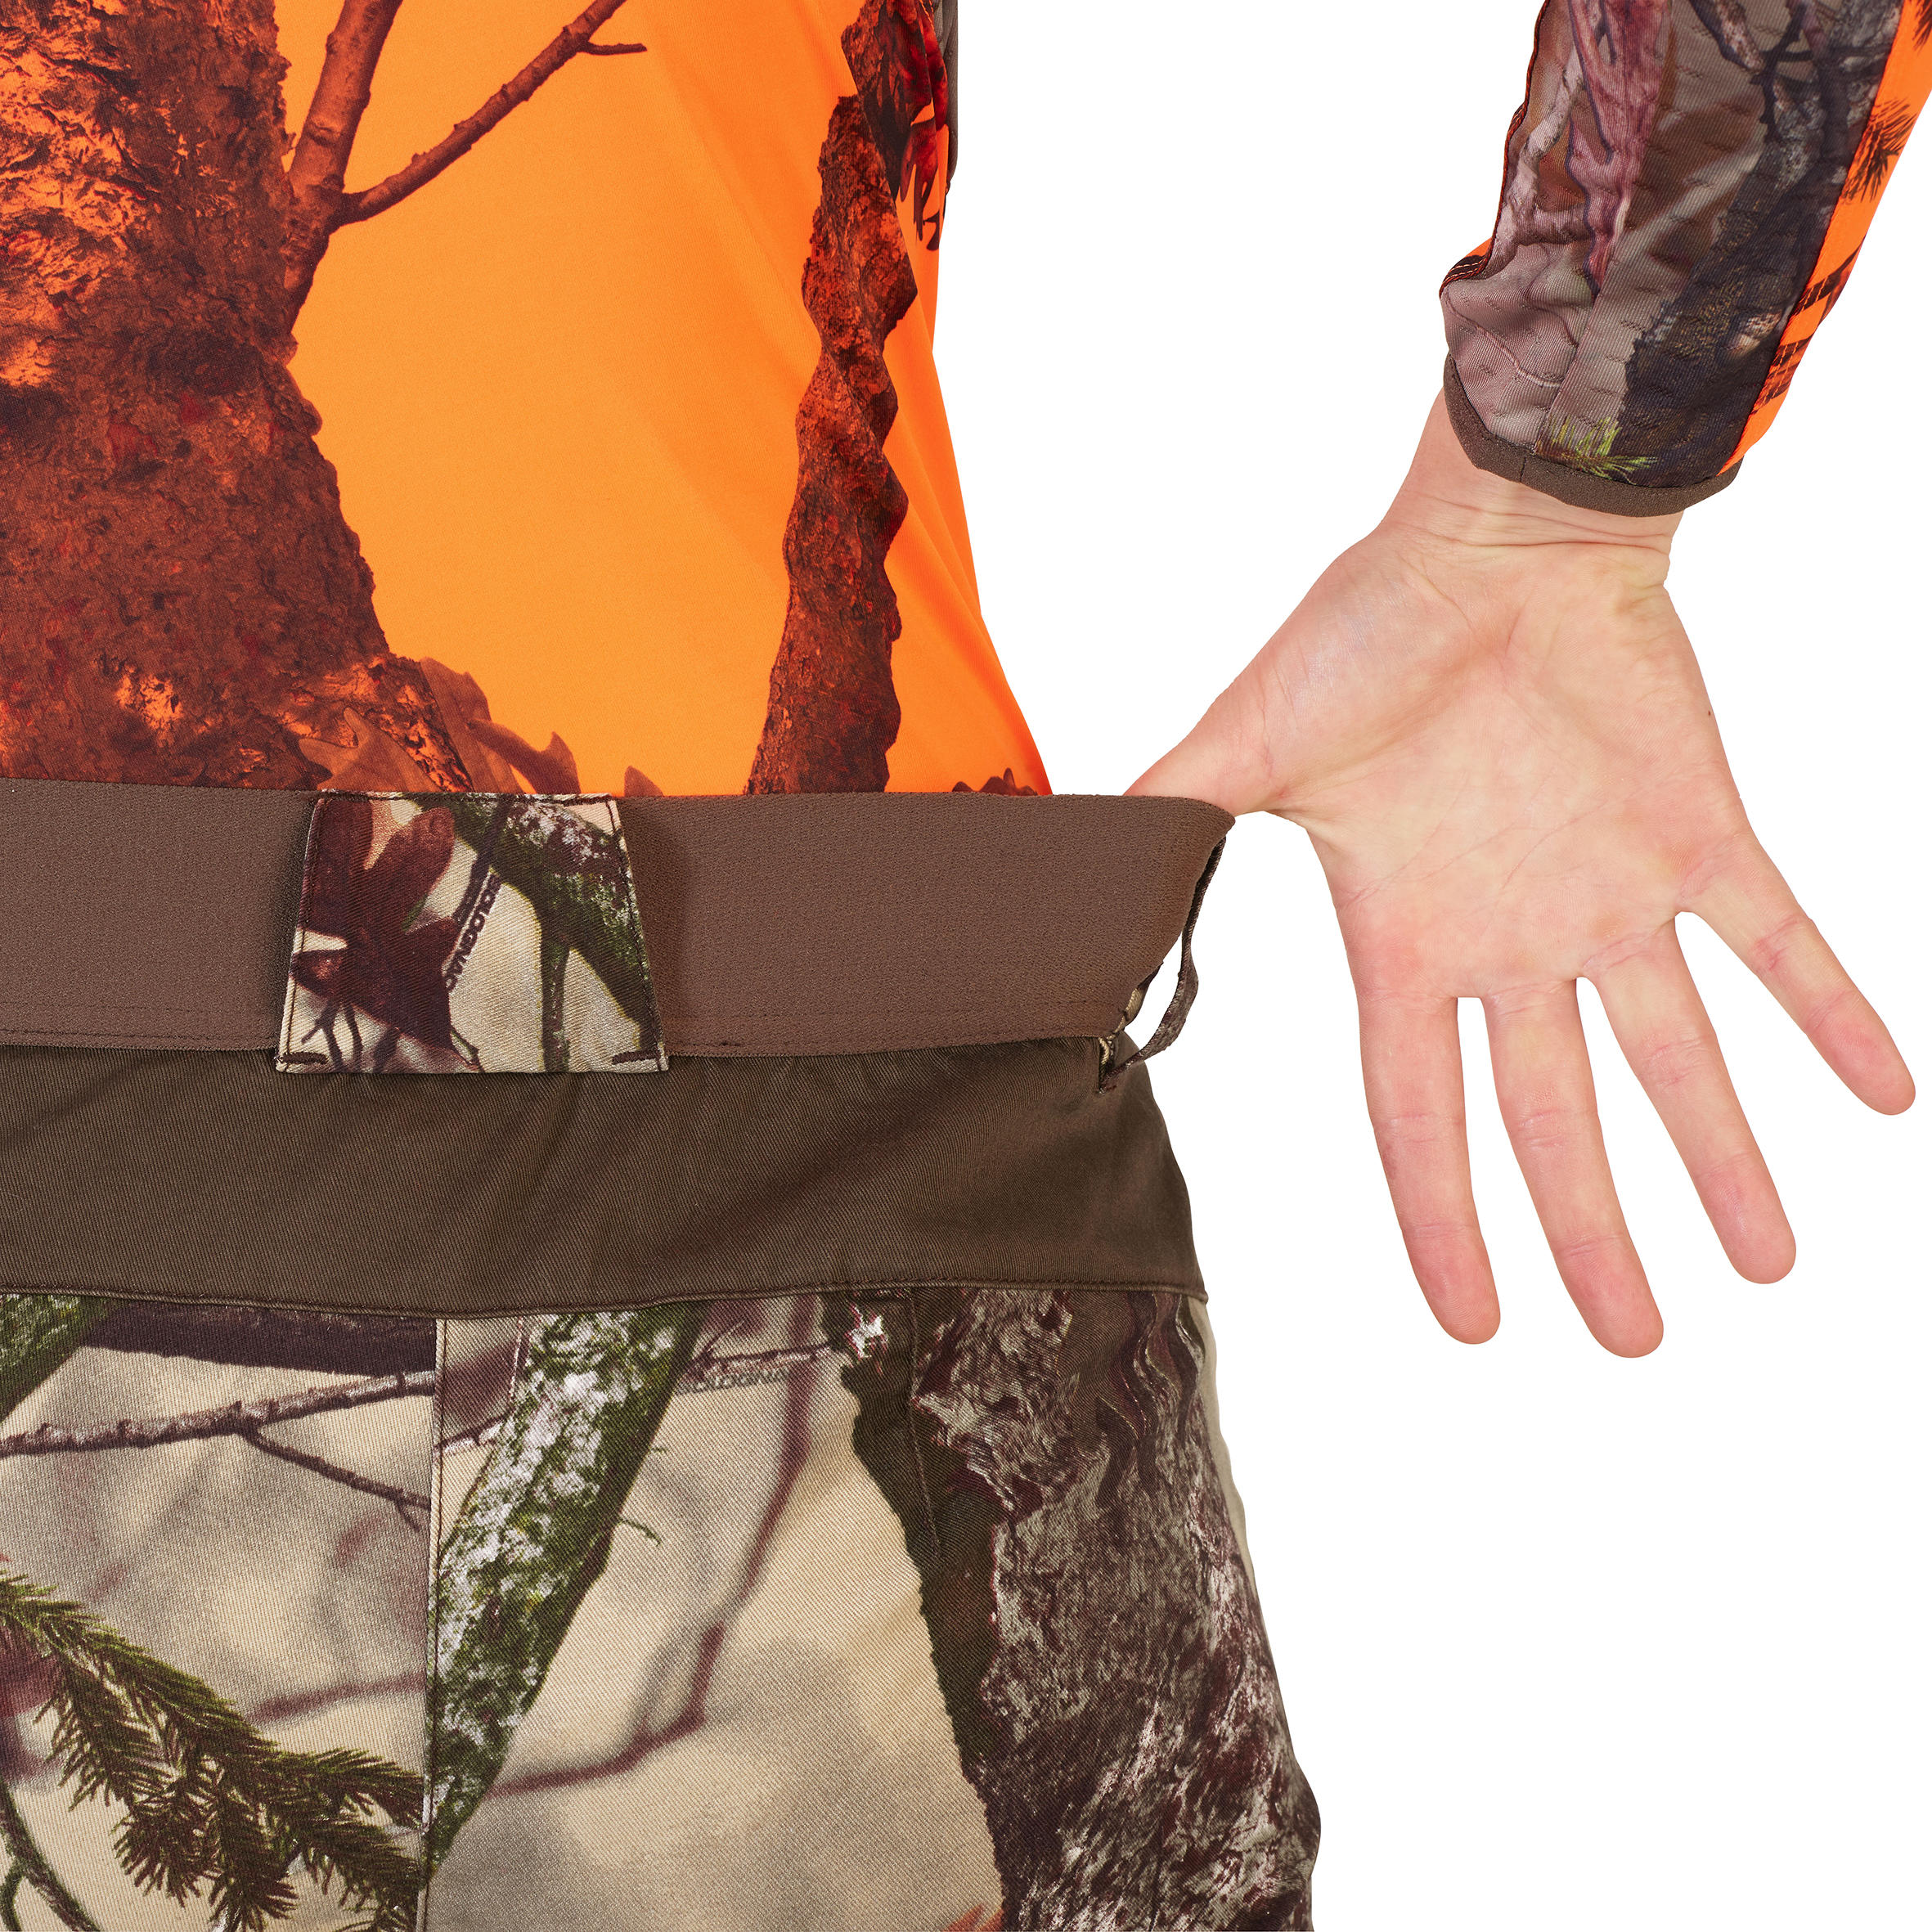 Women's Silent Breathable Trousers - Camo 4/7